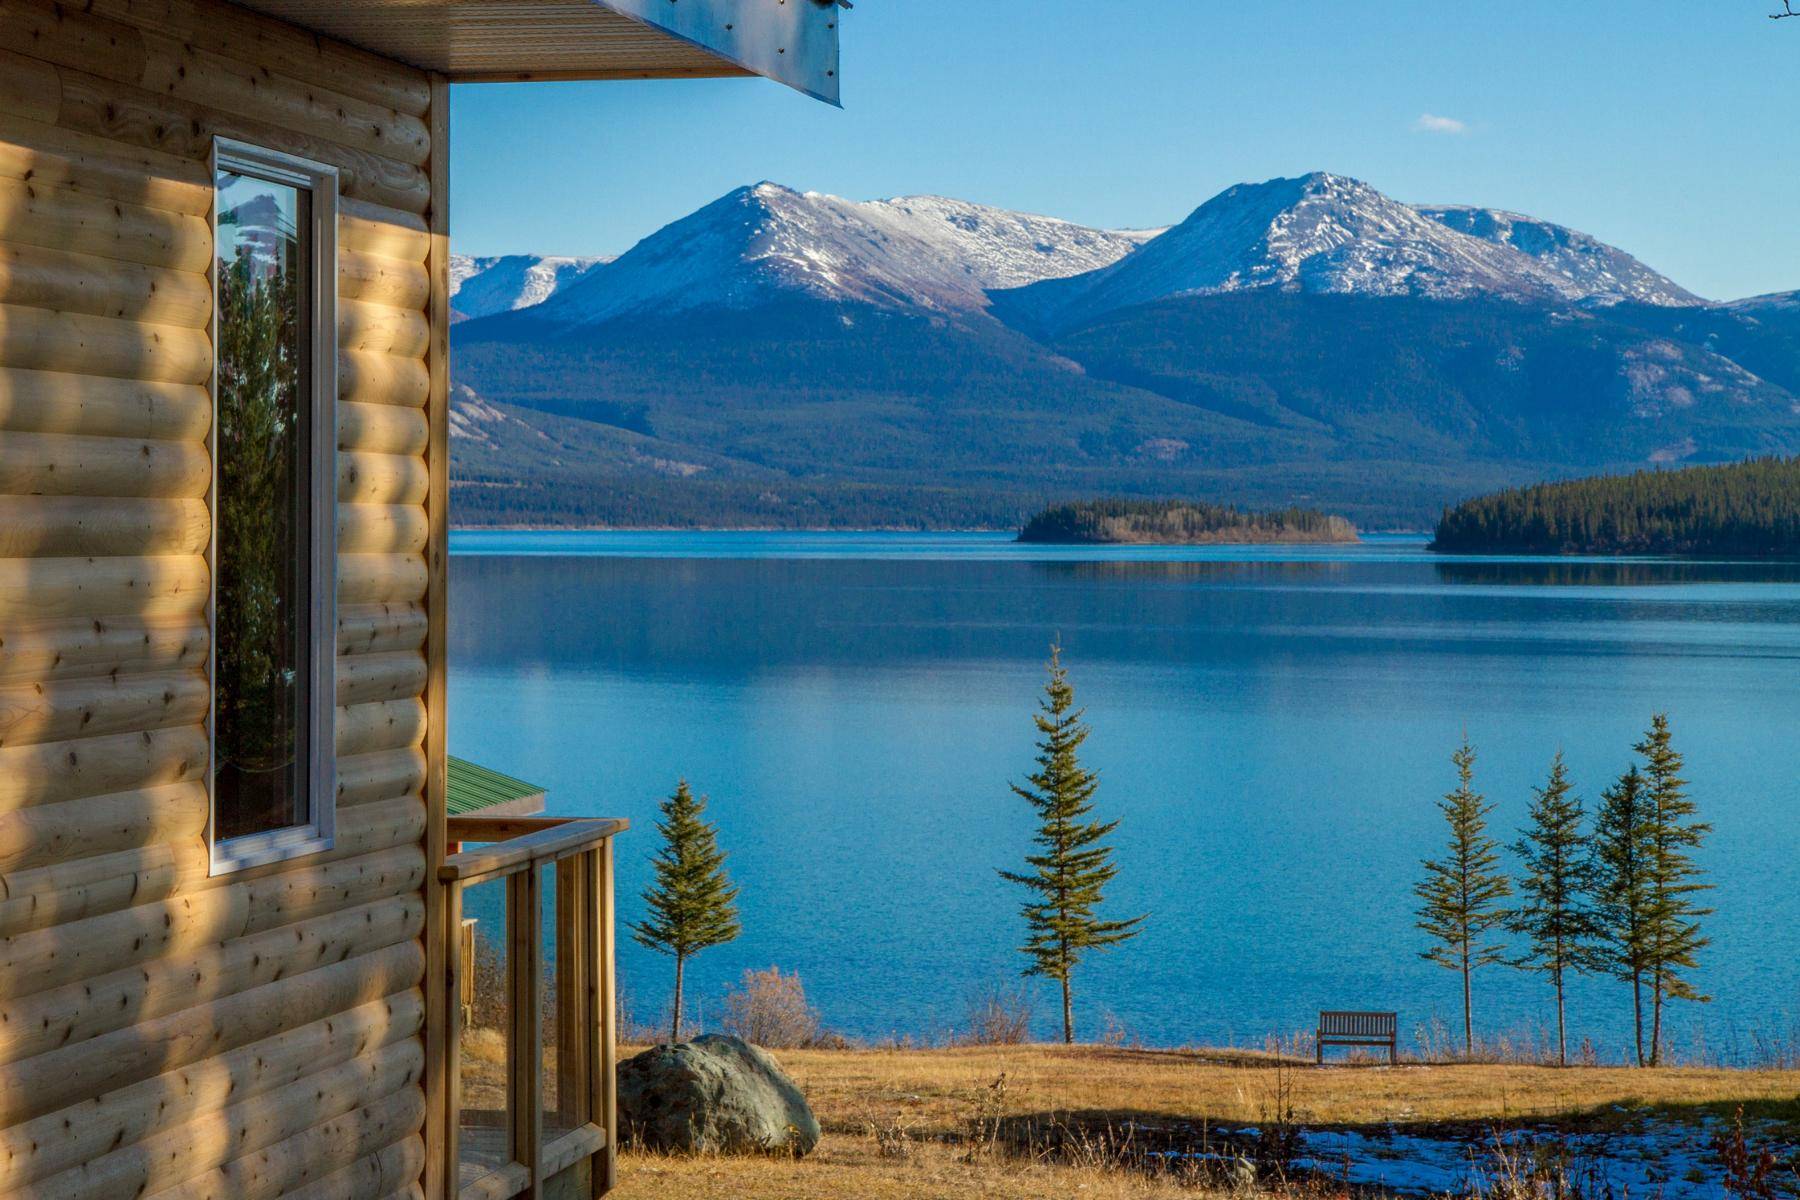 outside of a wooden cabin, view on blue lake and mountains